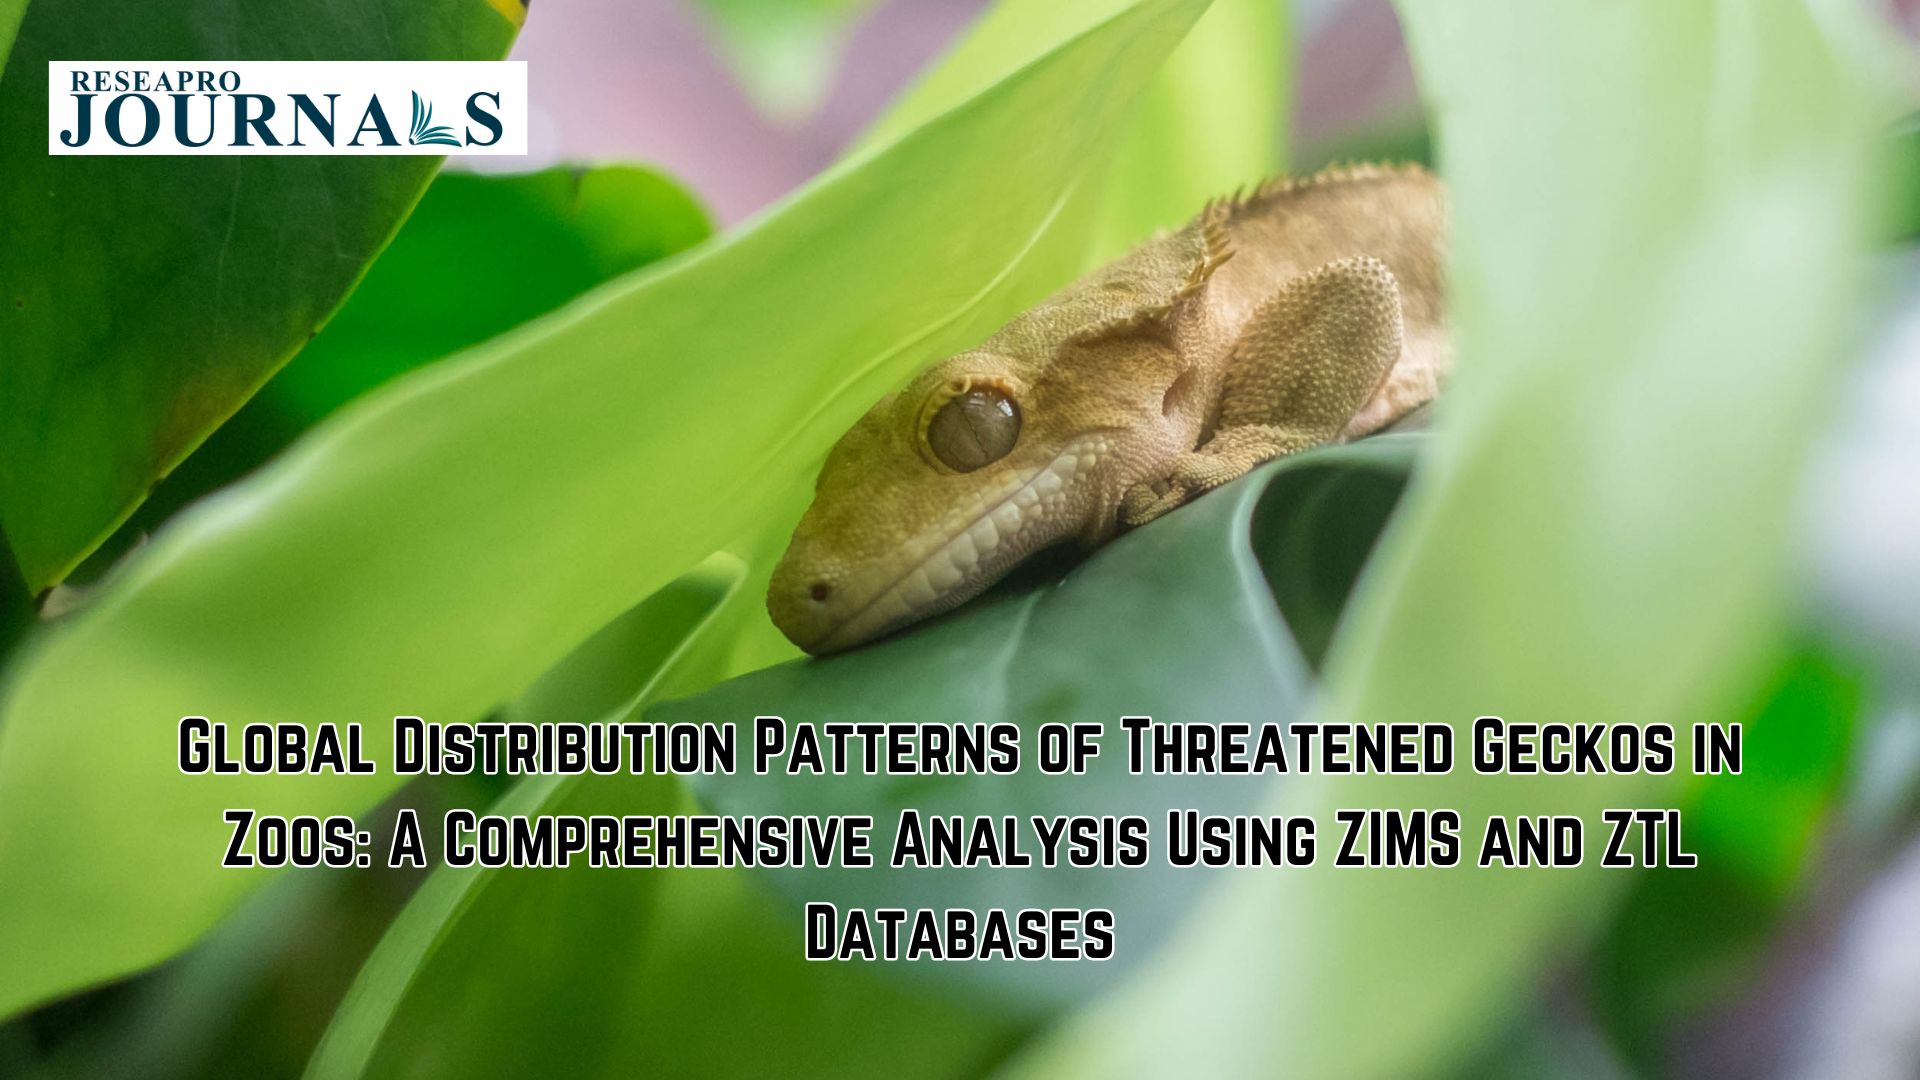 Global Distribution Patterns of Threatened Geckos in Zoos: A Comprehensive Analysis Using ZIMS and ZTL Databases